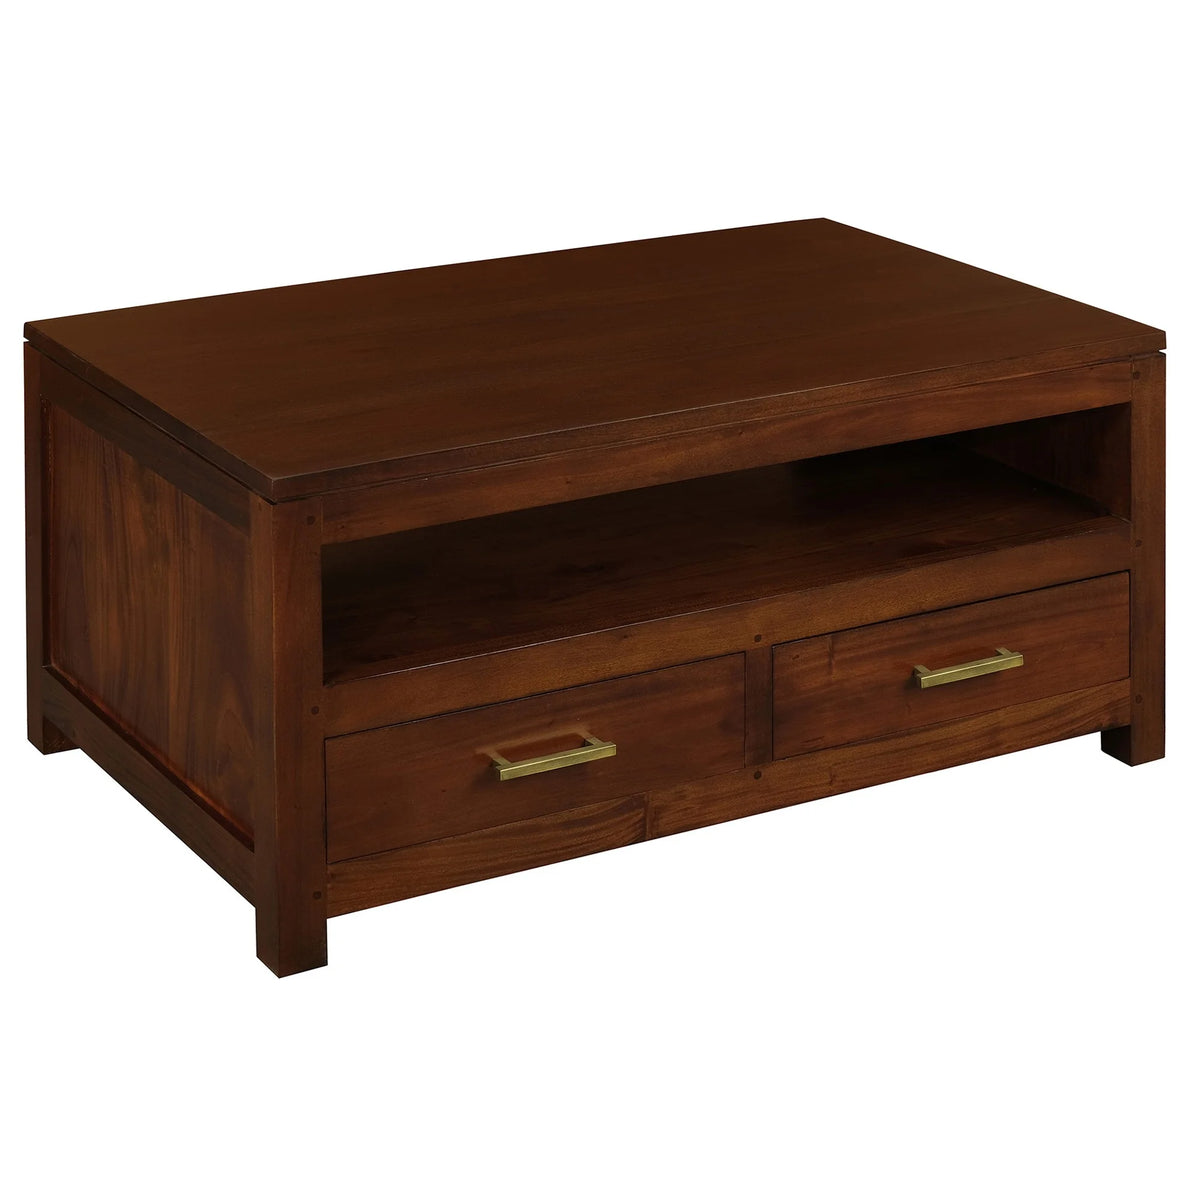 Paris Solid Timber 4 Drawer Coffee Table - Mahogany